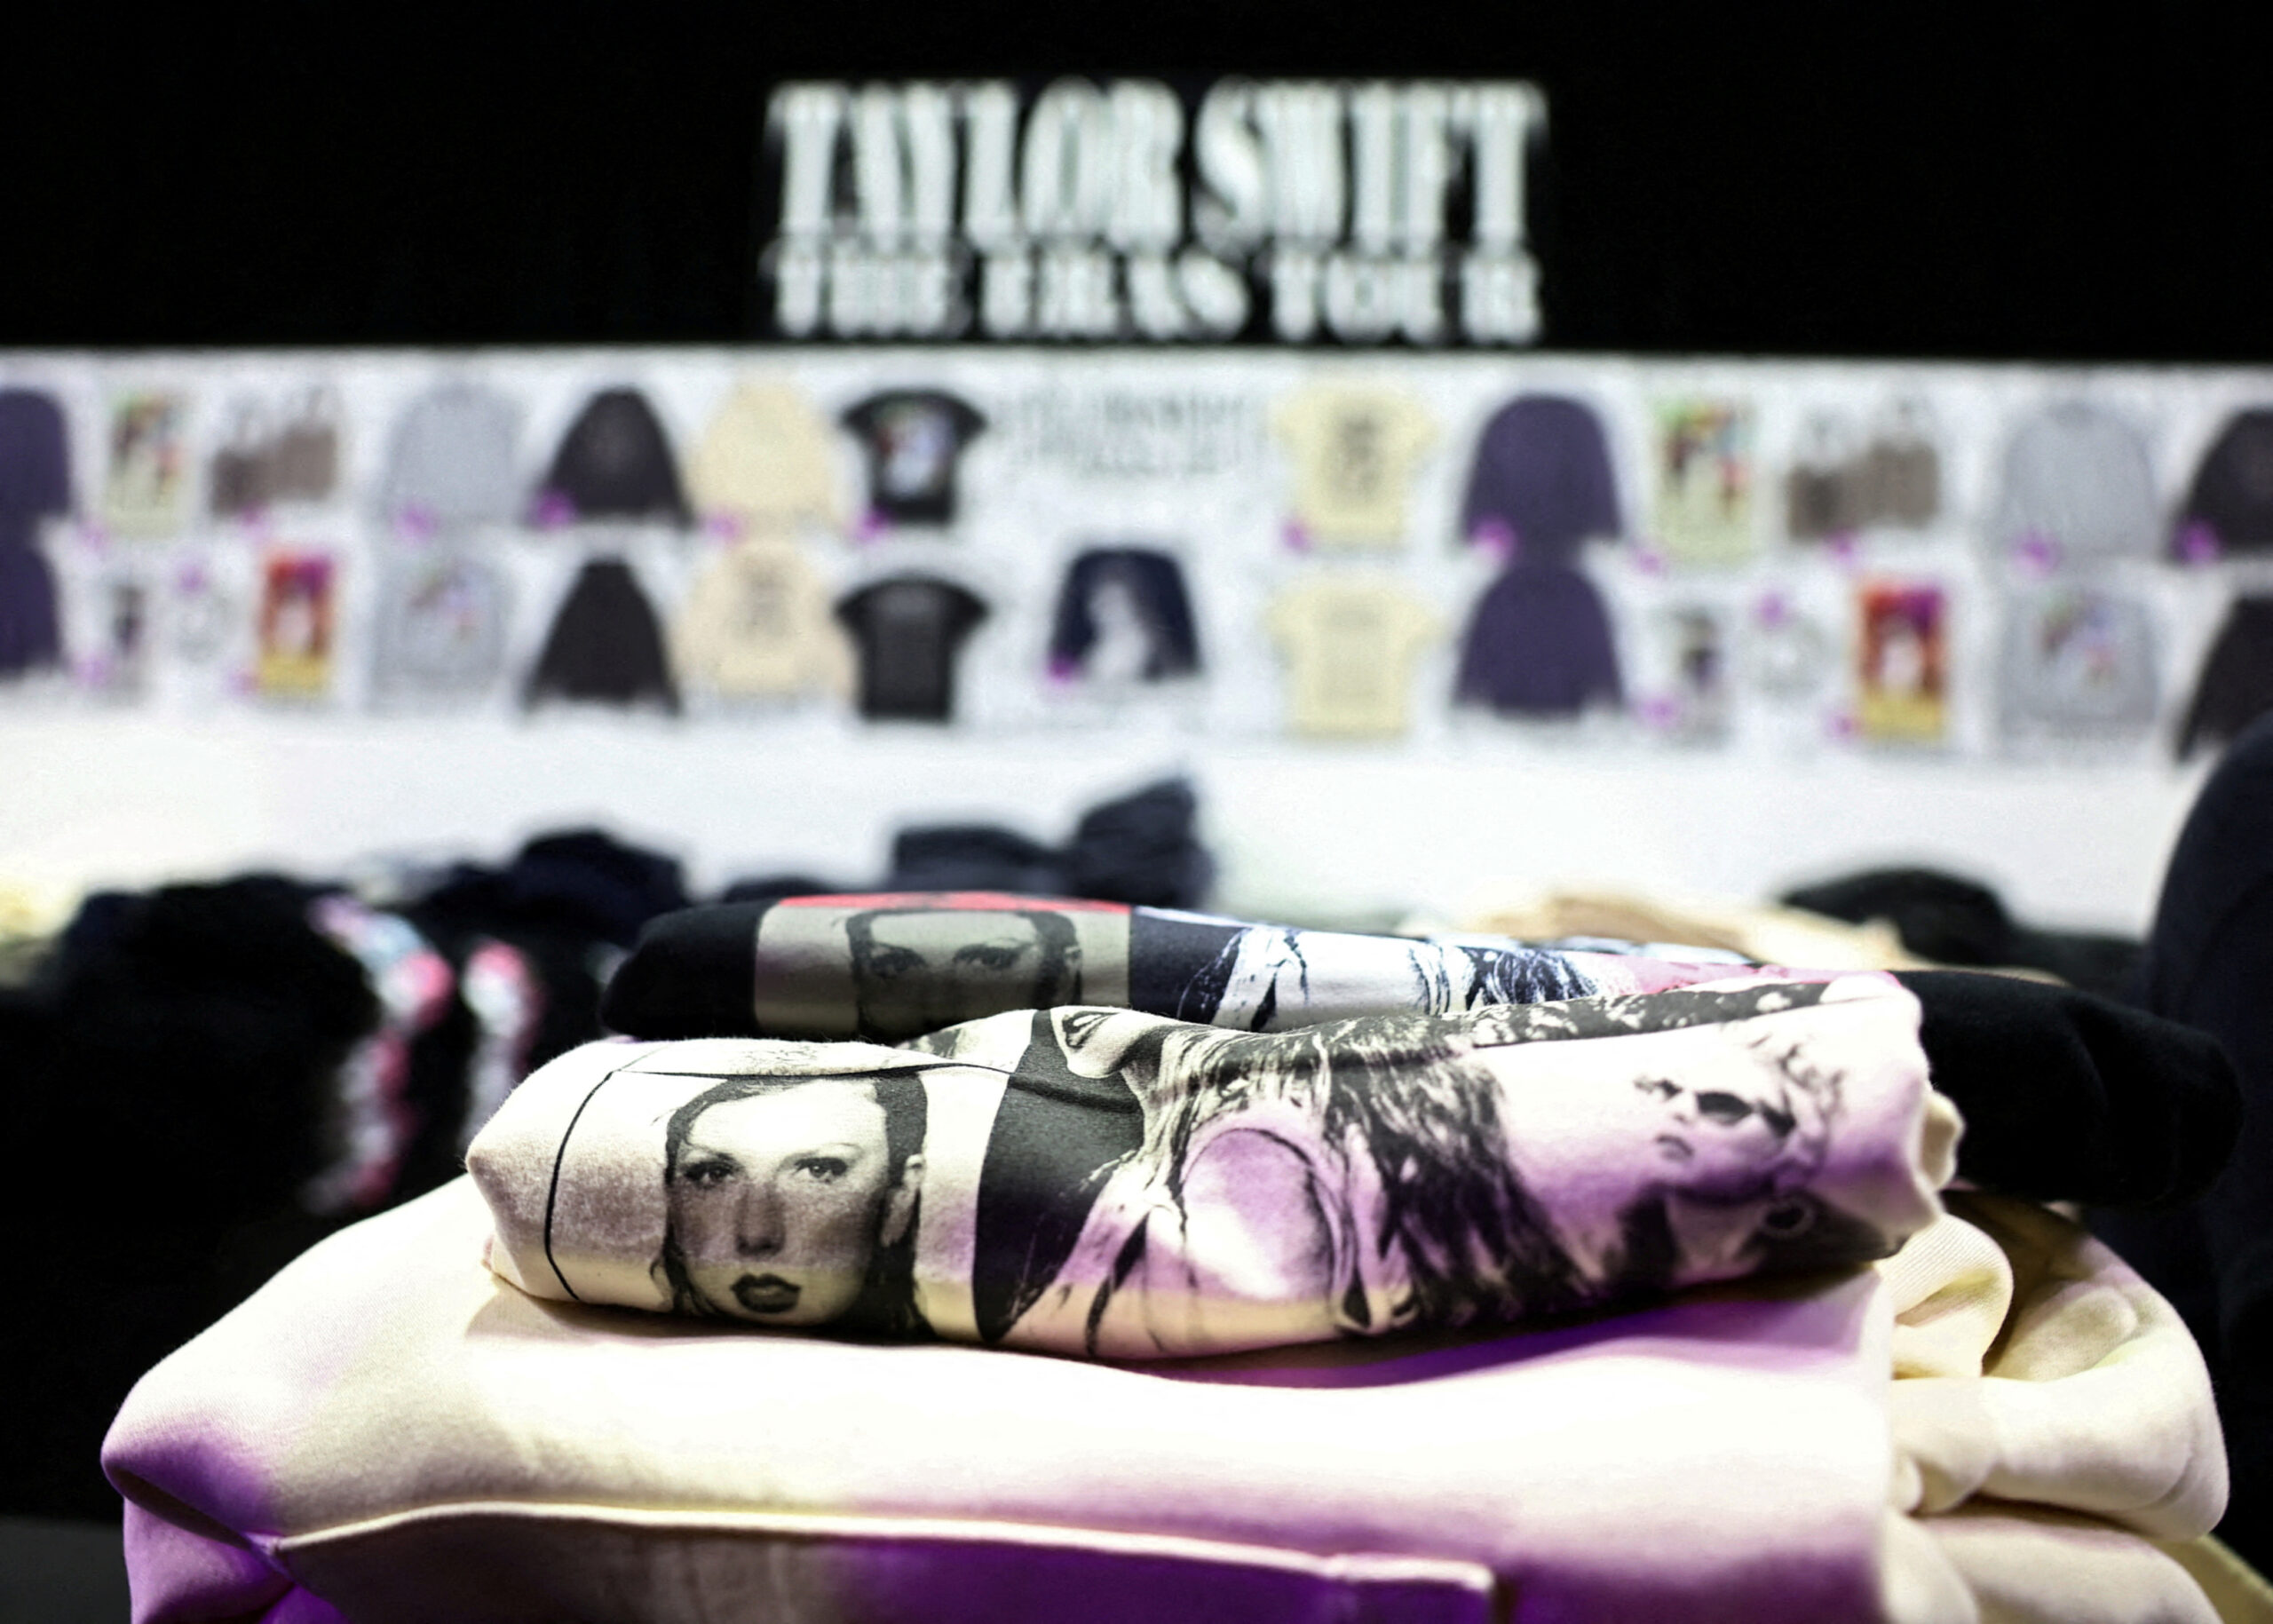 Australia retail sales up in Feb thanks to Taylor Swift concerts